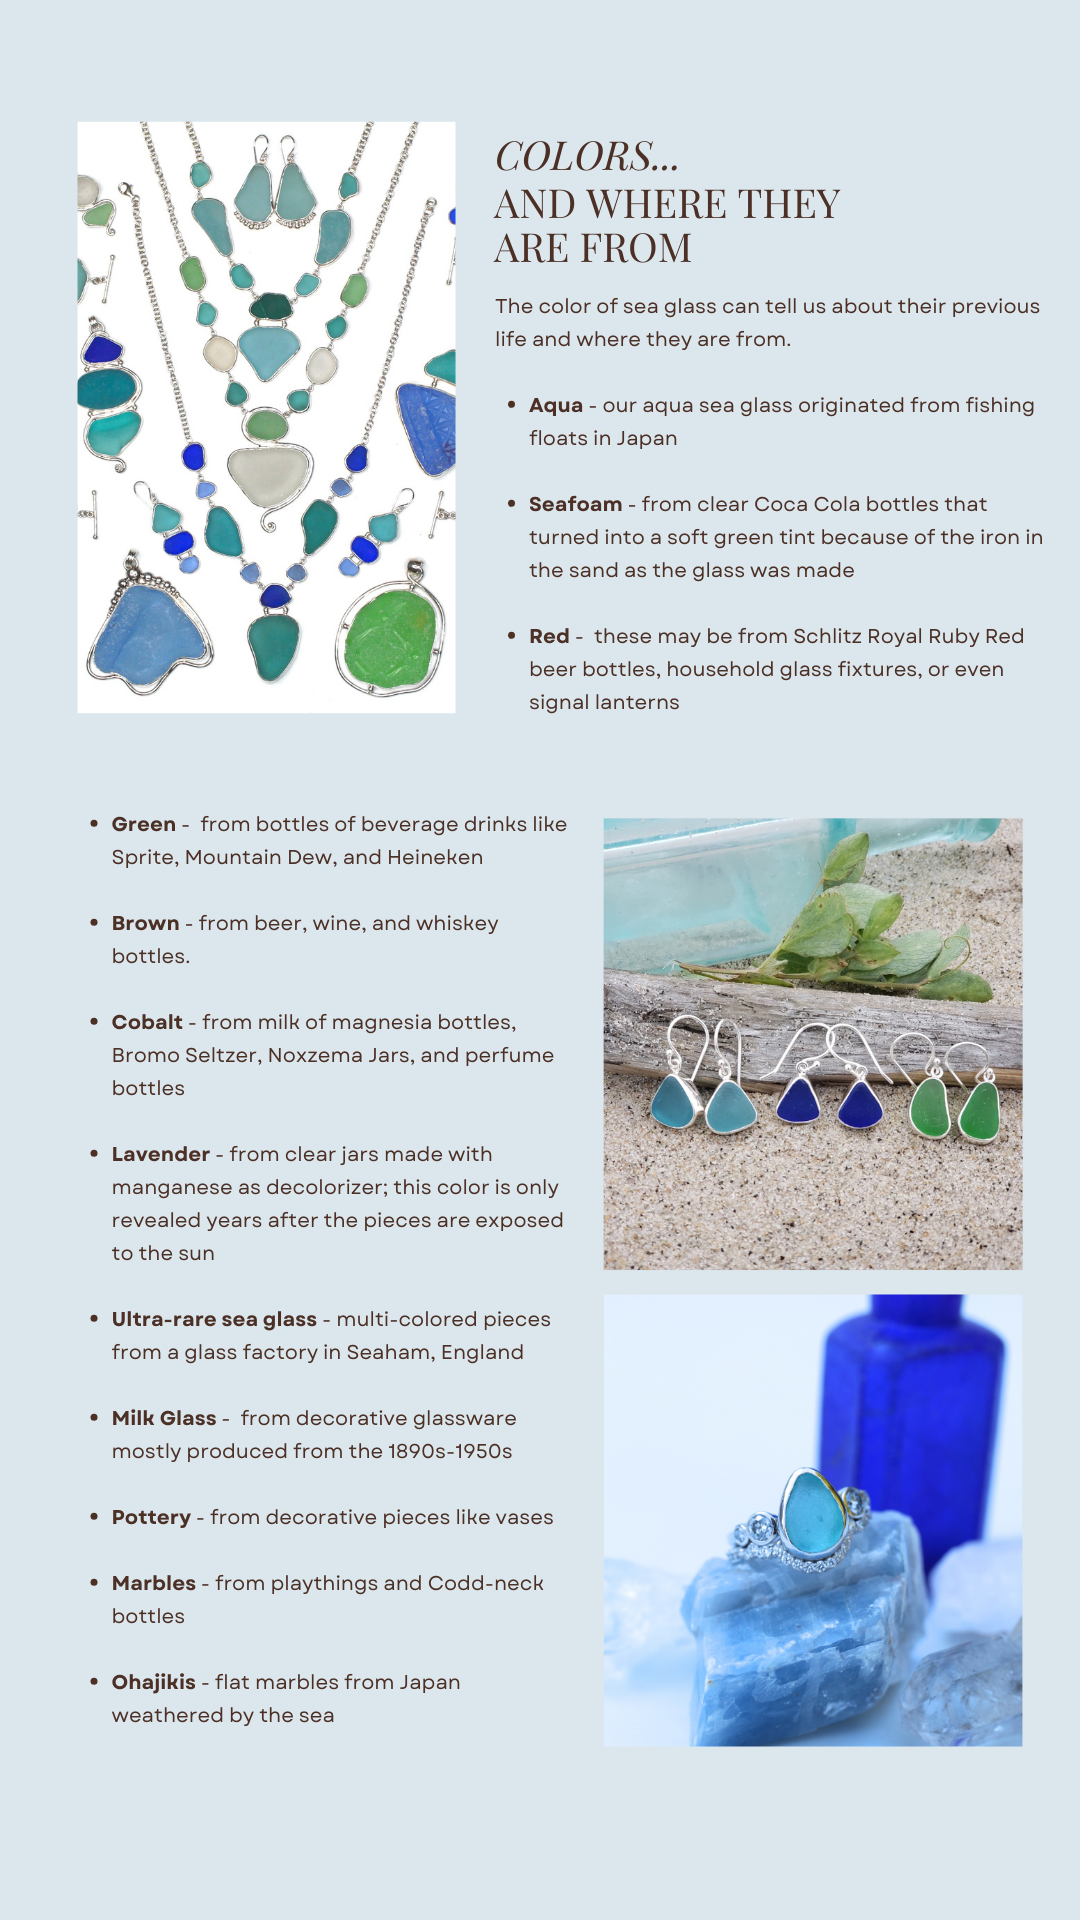 What is sea glass made from?